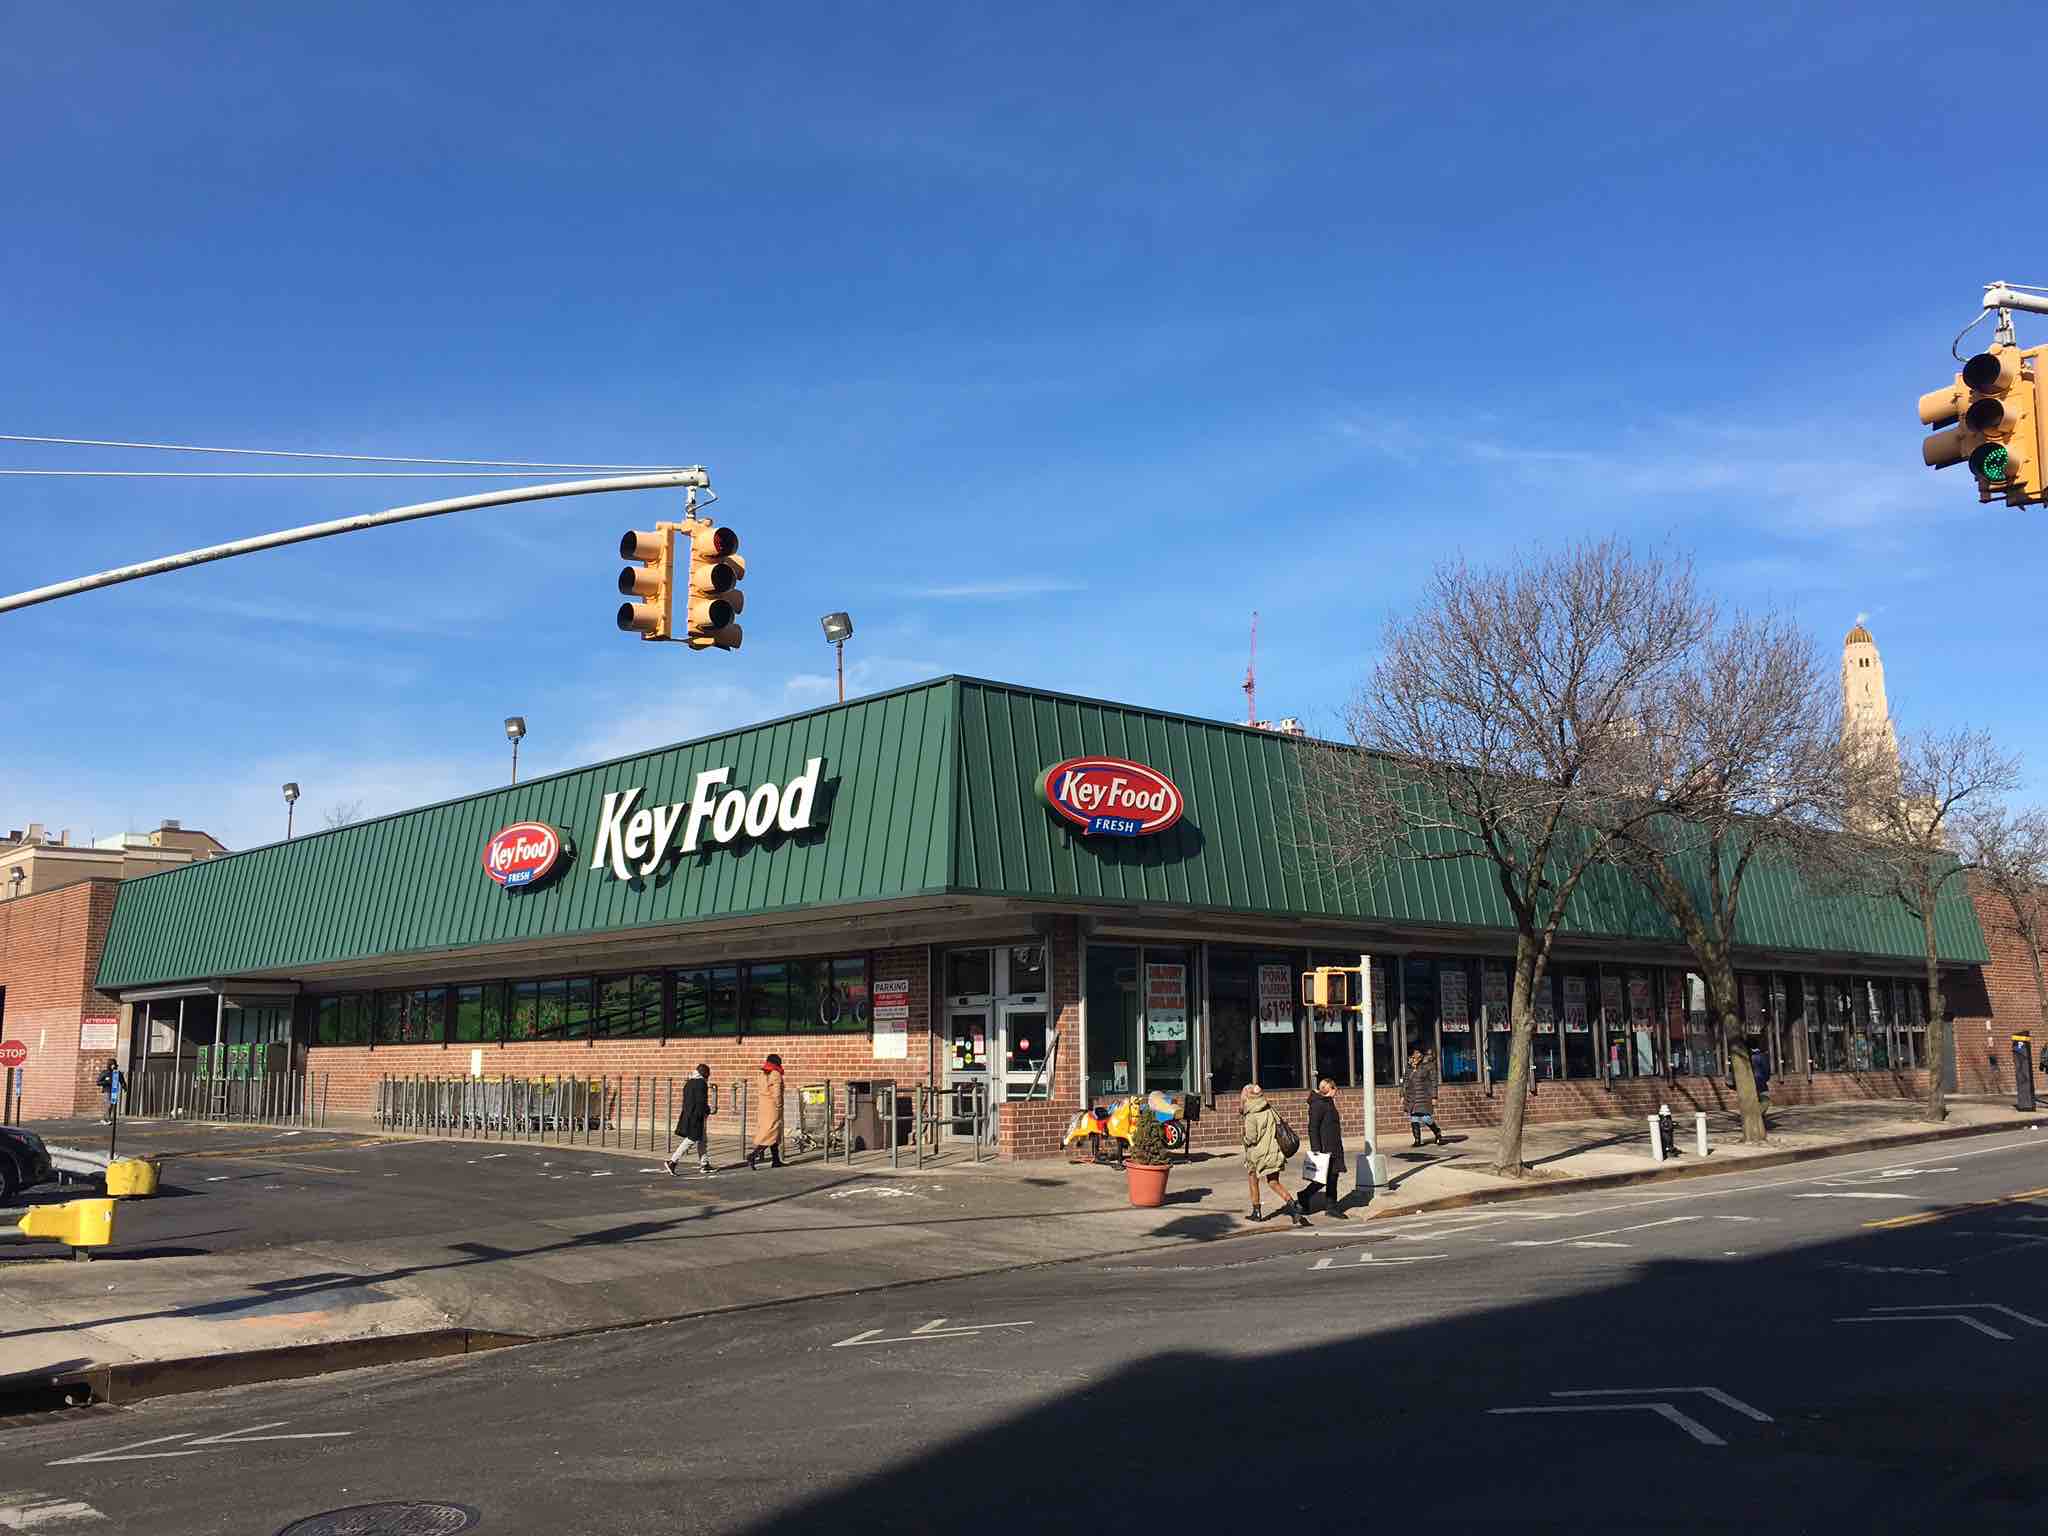 KeyFood Replacing Development To Proceed At 120 5th Ave “Within A Matter Of Months”